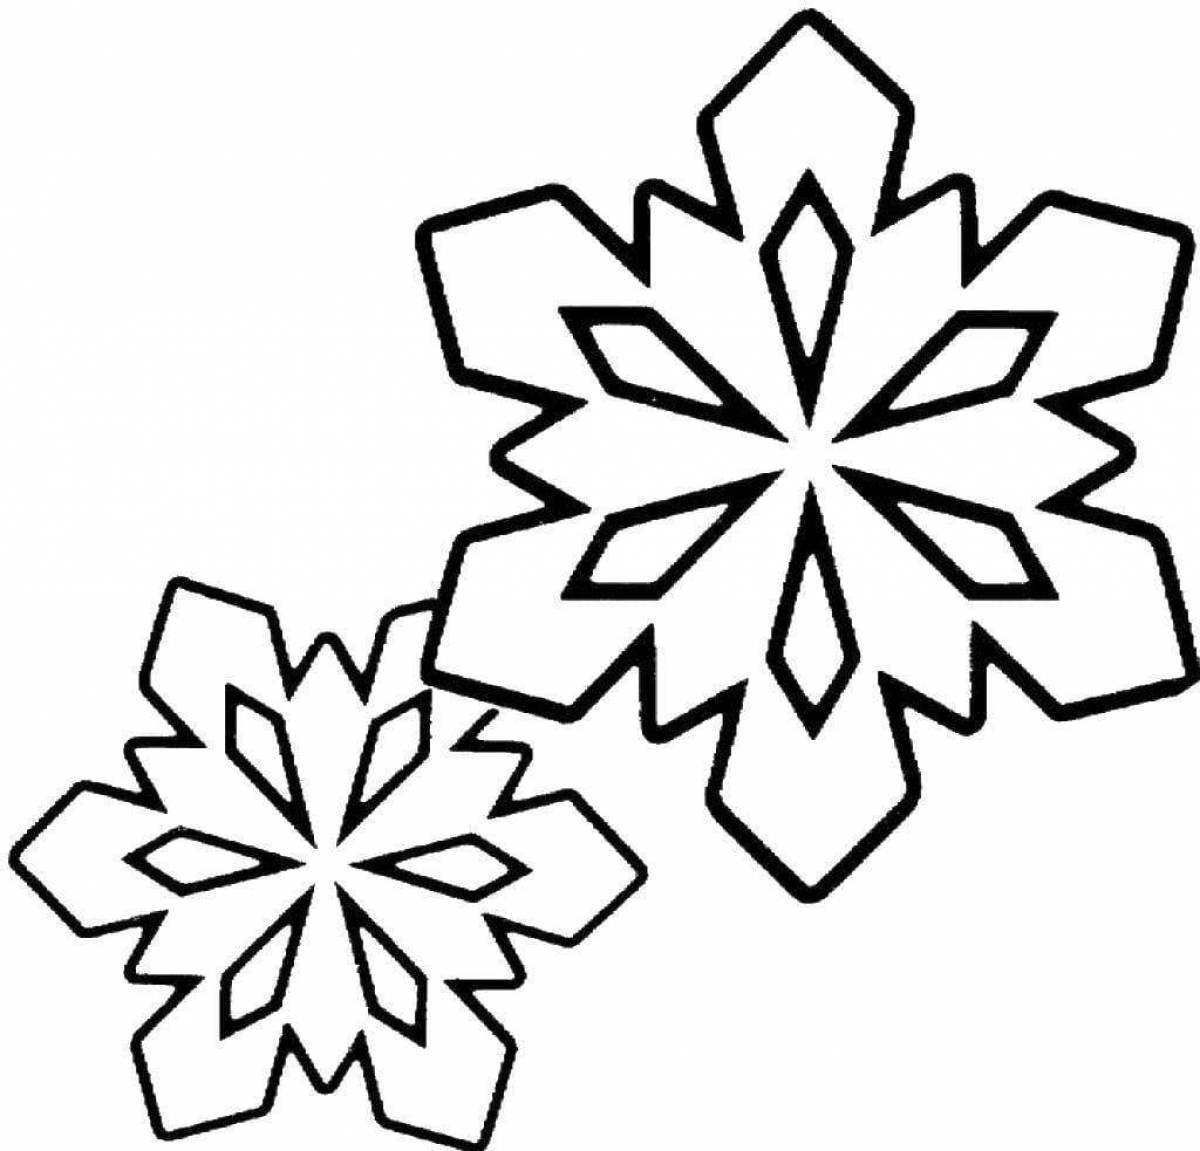 Colorful coloring of snowflakes